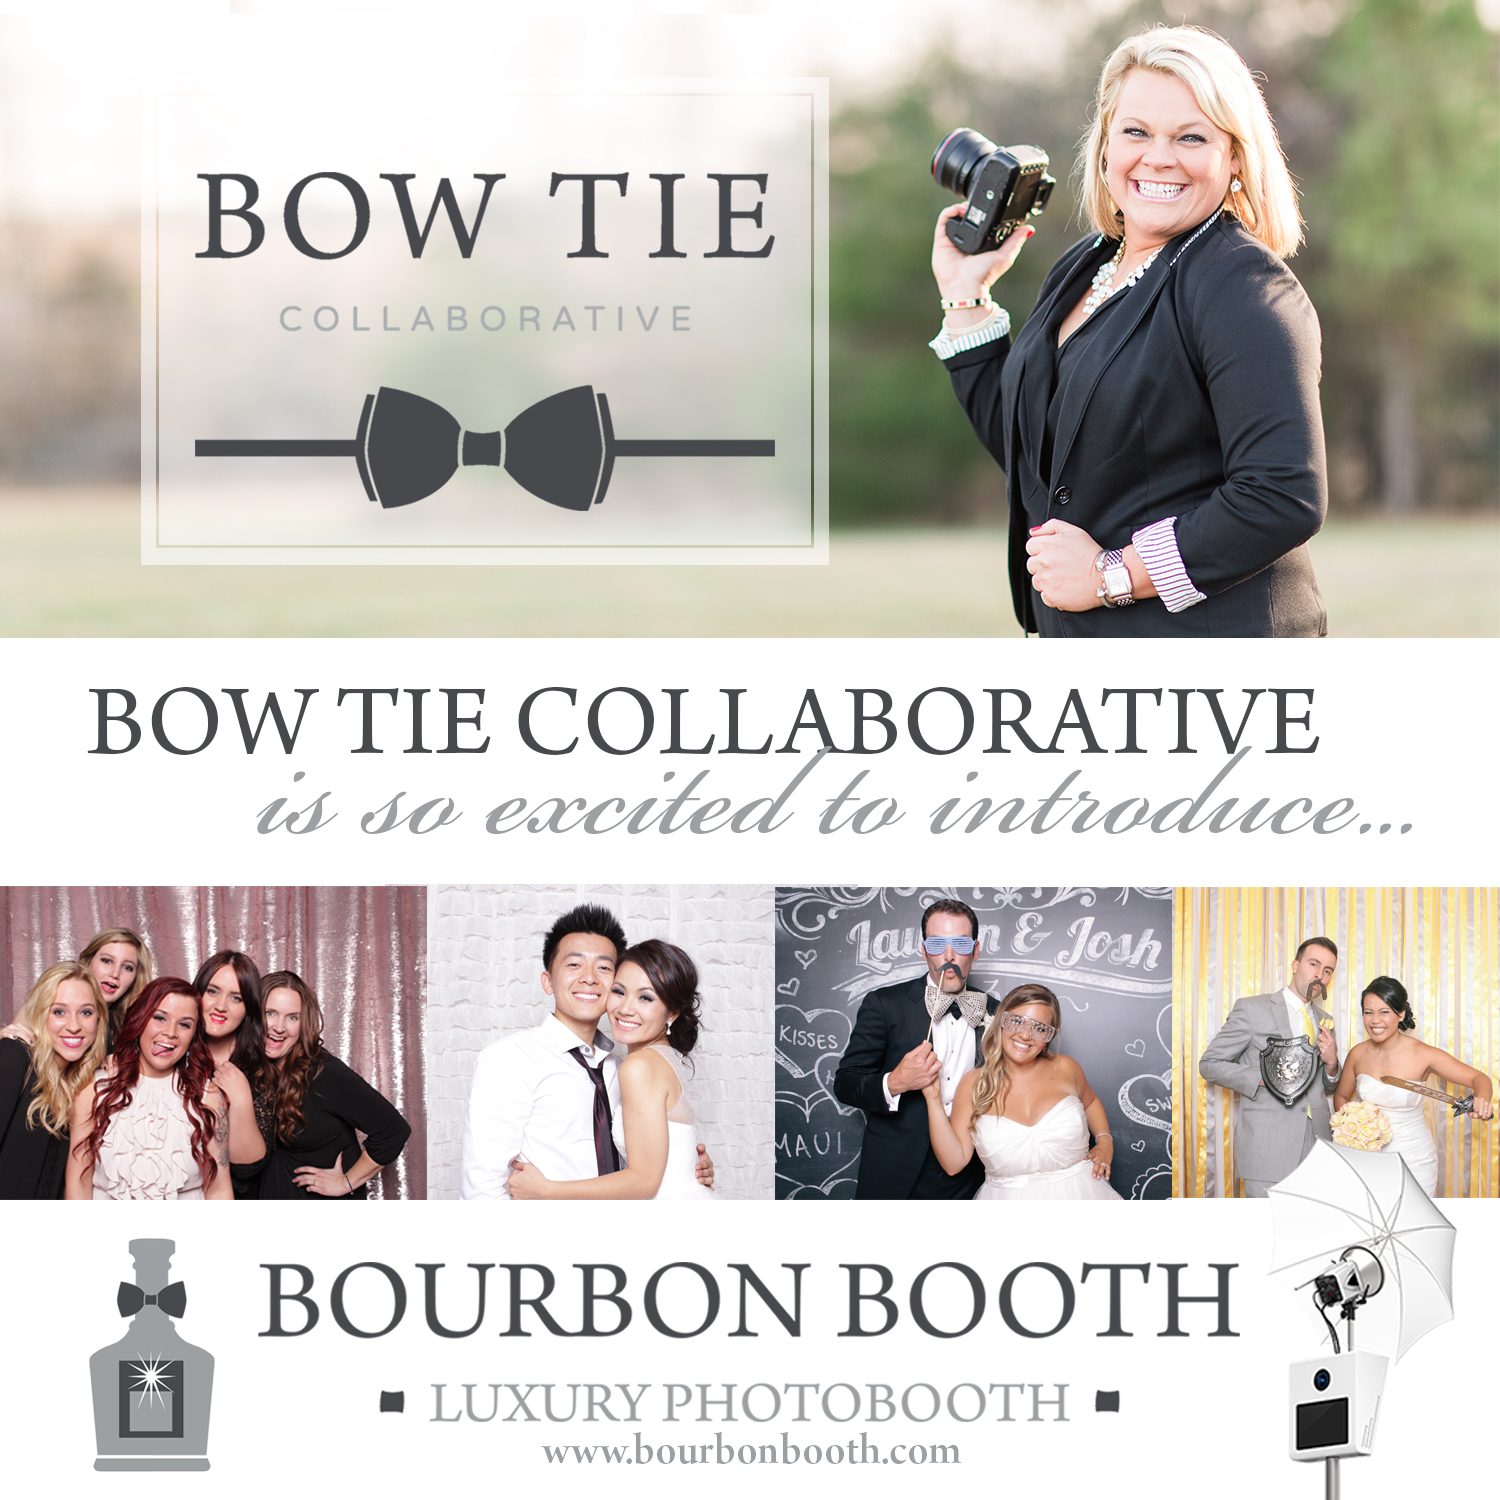 Introducing Bourbon Booth - A Luxury Photobooth Experience 